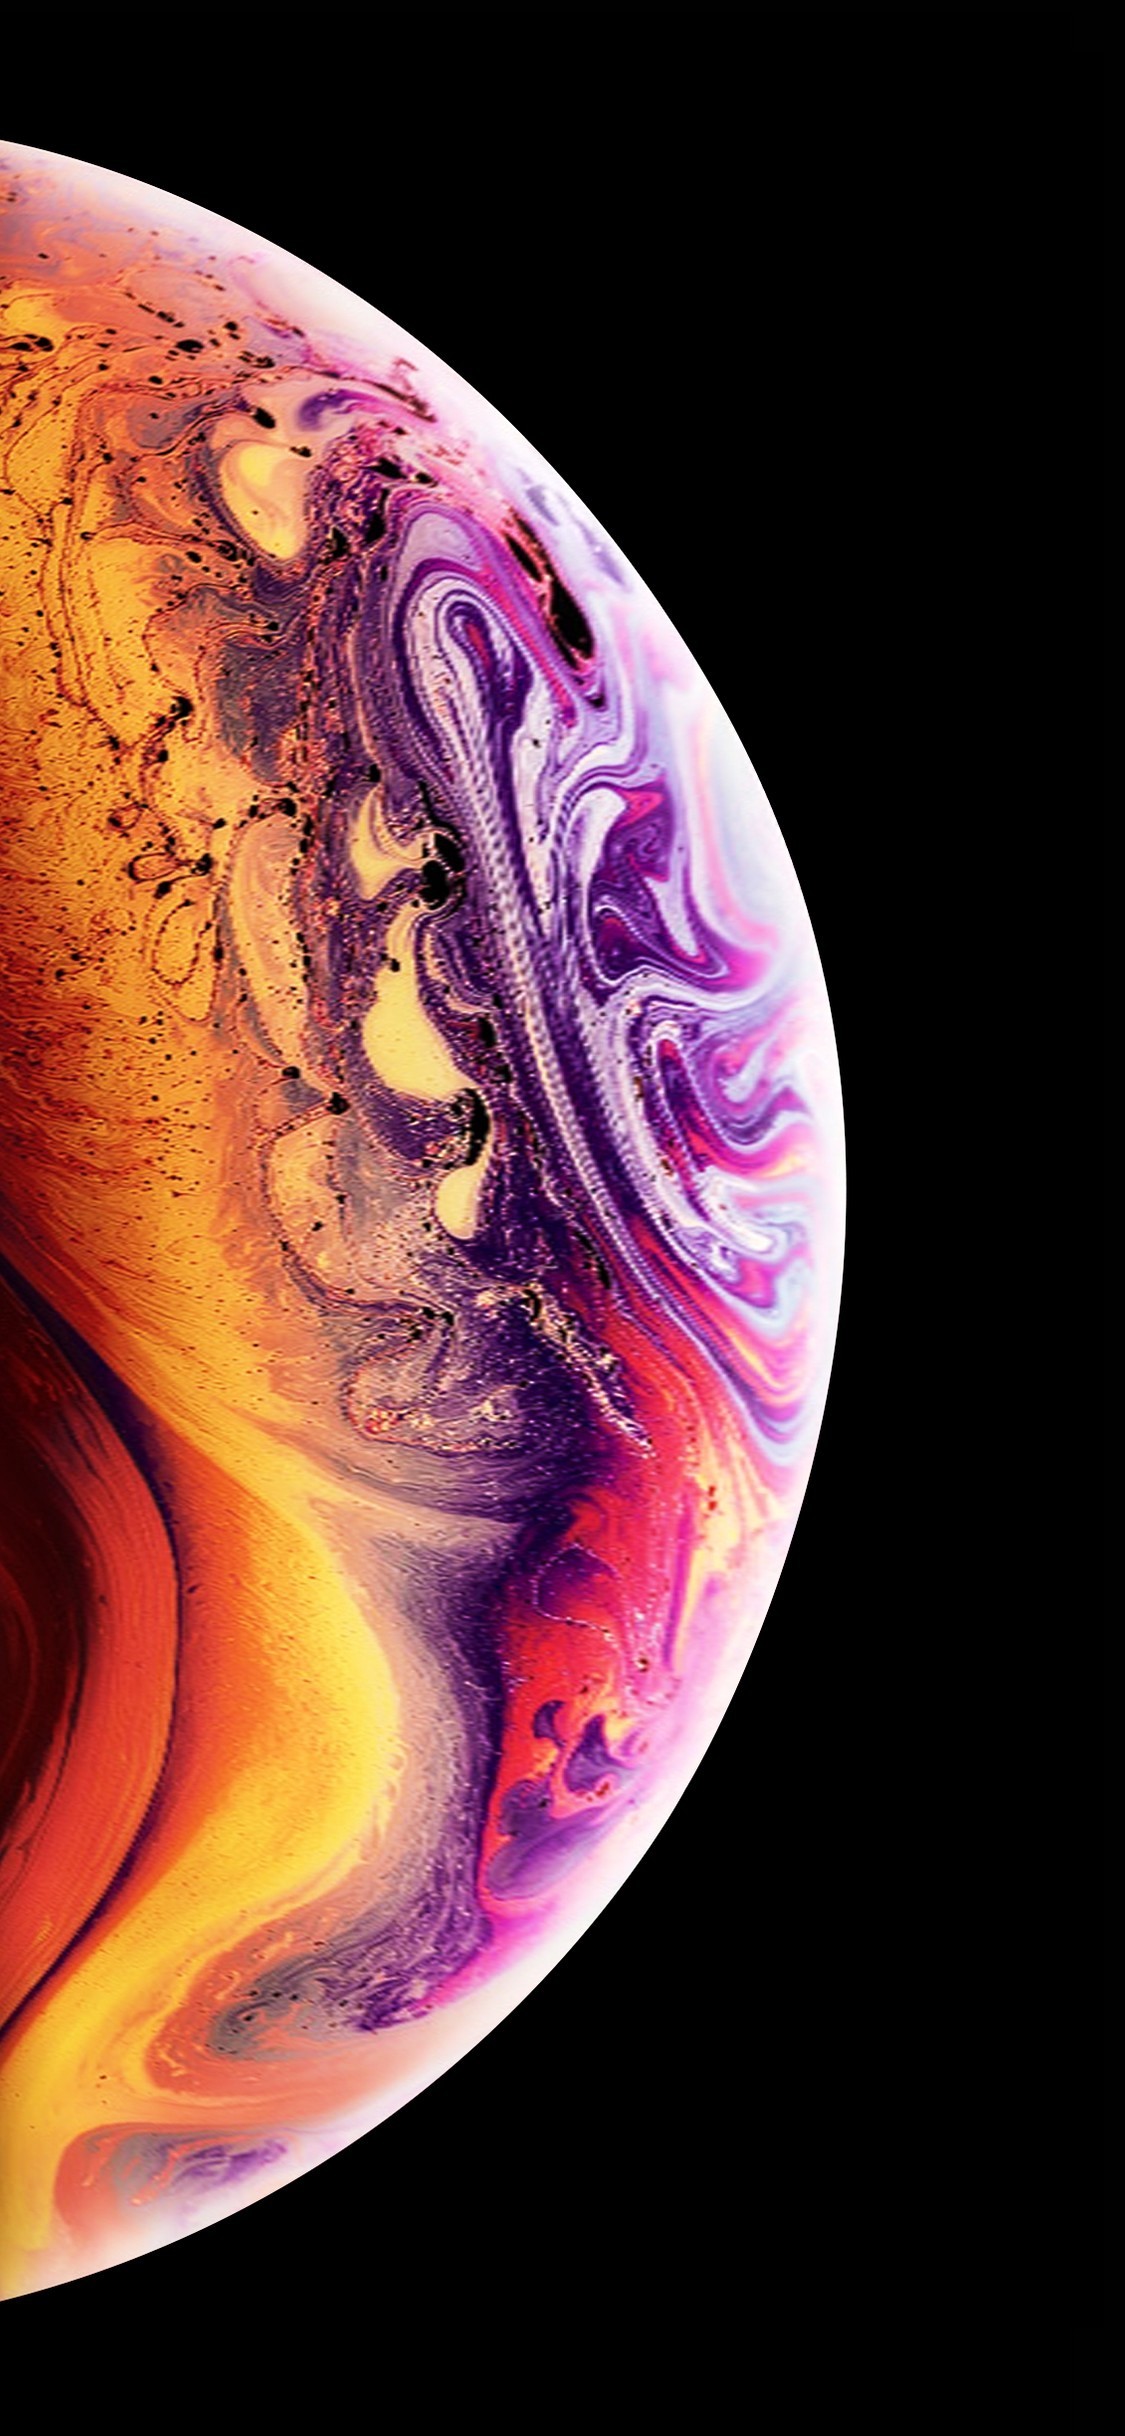 iPhone XS Screen Lock Wallpaper With high-resolution 1125X2436 pixel. You can use this wallpaper for your iPhone 5, 6, 7, 8, X, XS, XR backgrounds, Mobile Screensaver, or iPad Lock Screen